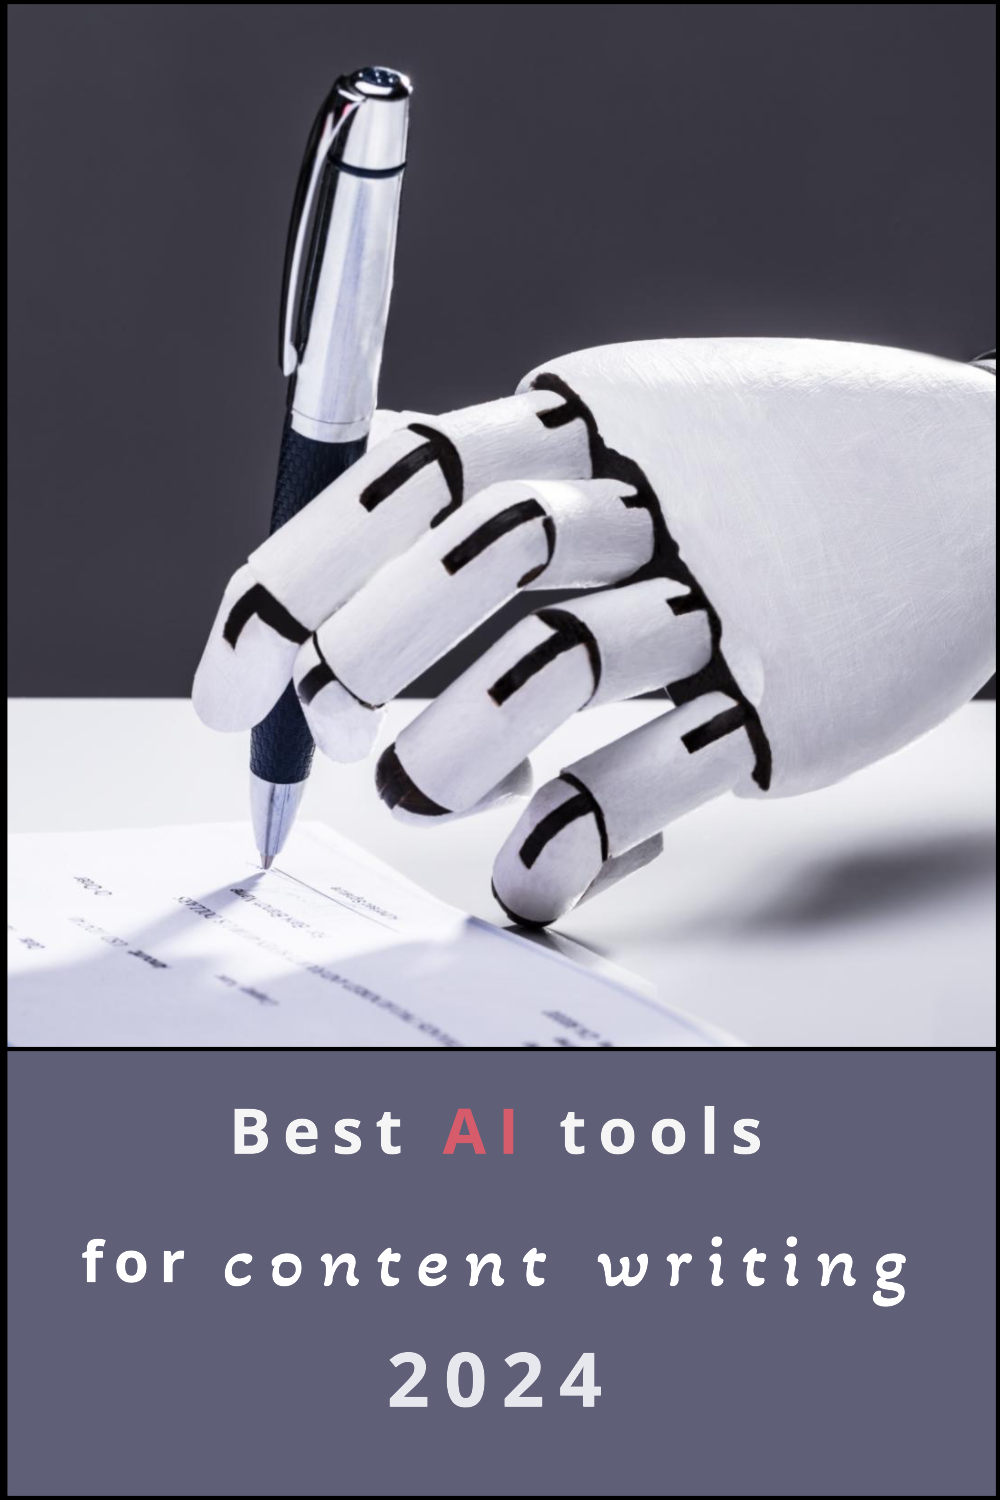 Best AI tools for content writing 2024